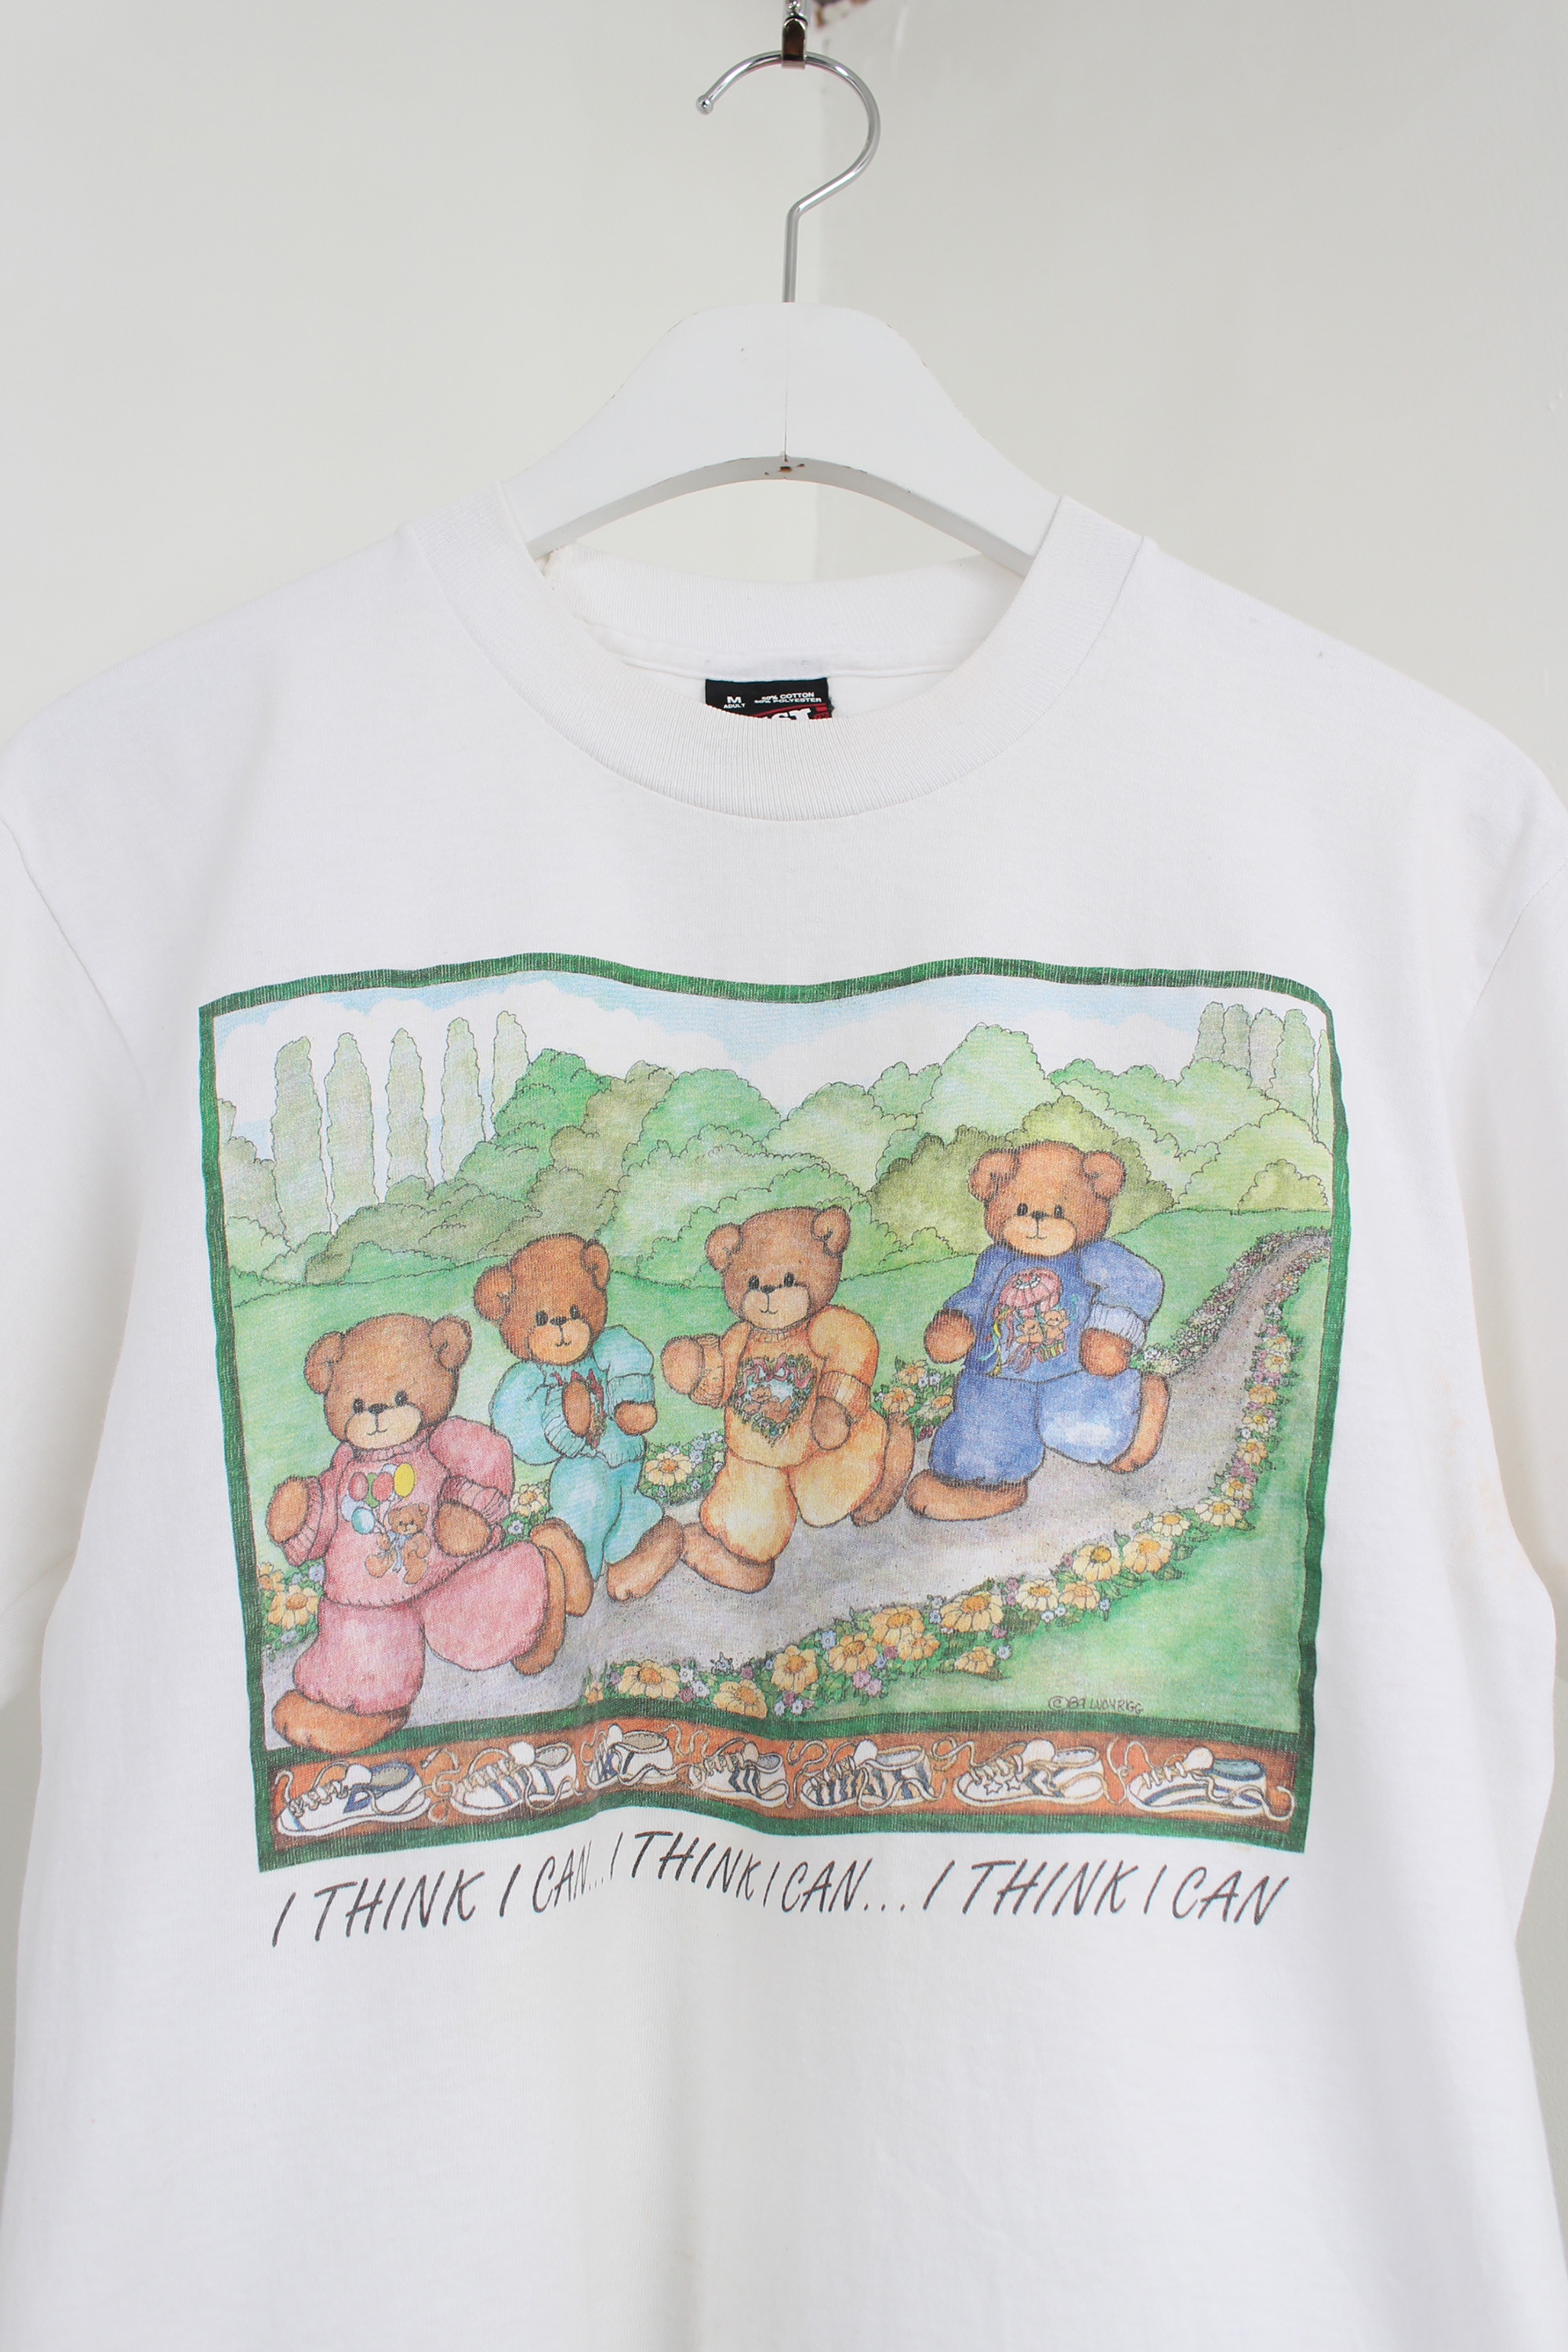 90s FRUIT OF THE LOOM t - shirts